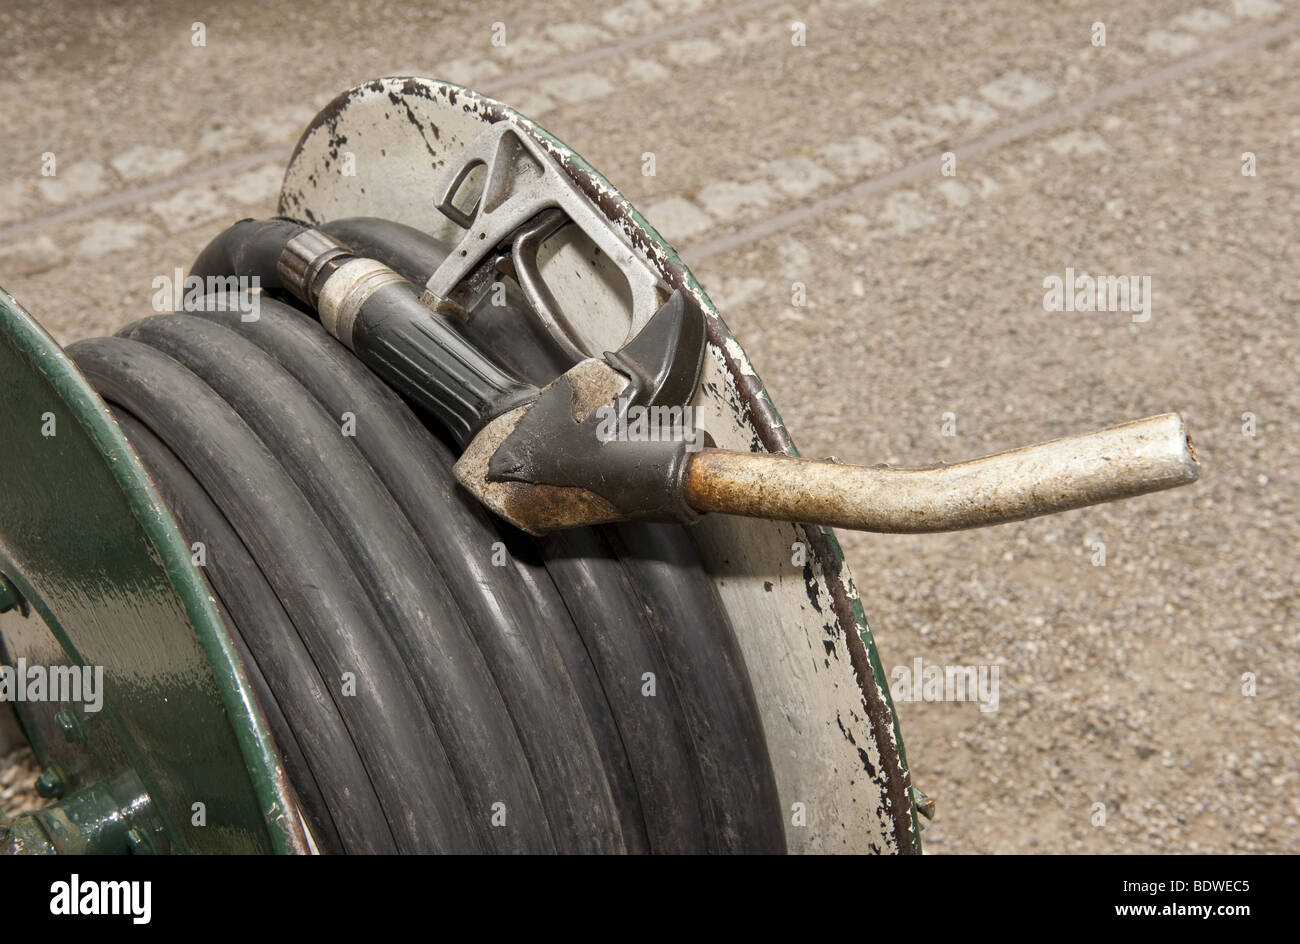 Close up of fuel pump nozzle handle and reel with coiled extendible hose  used for refueling canal narrow boats at wharf Stock Photo - Alamy